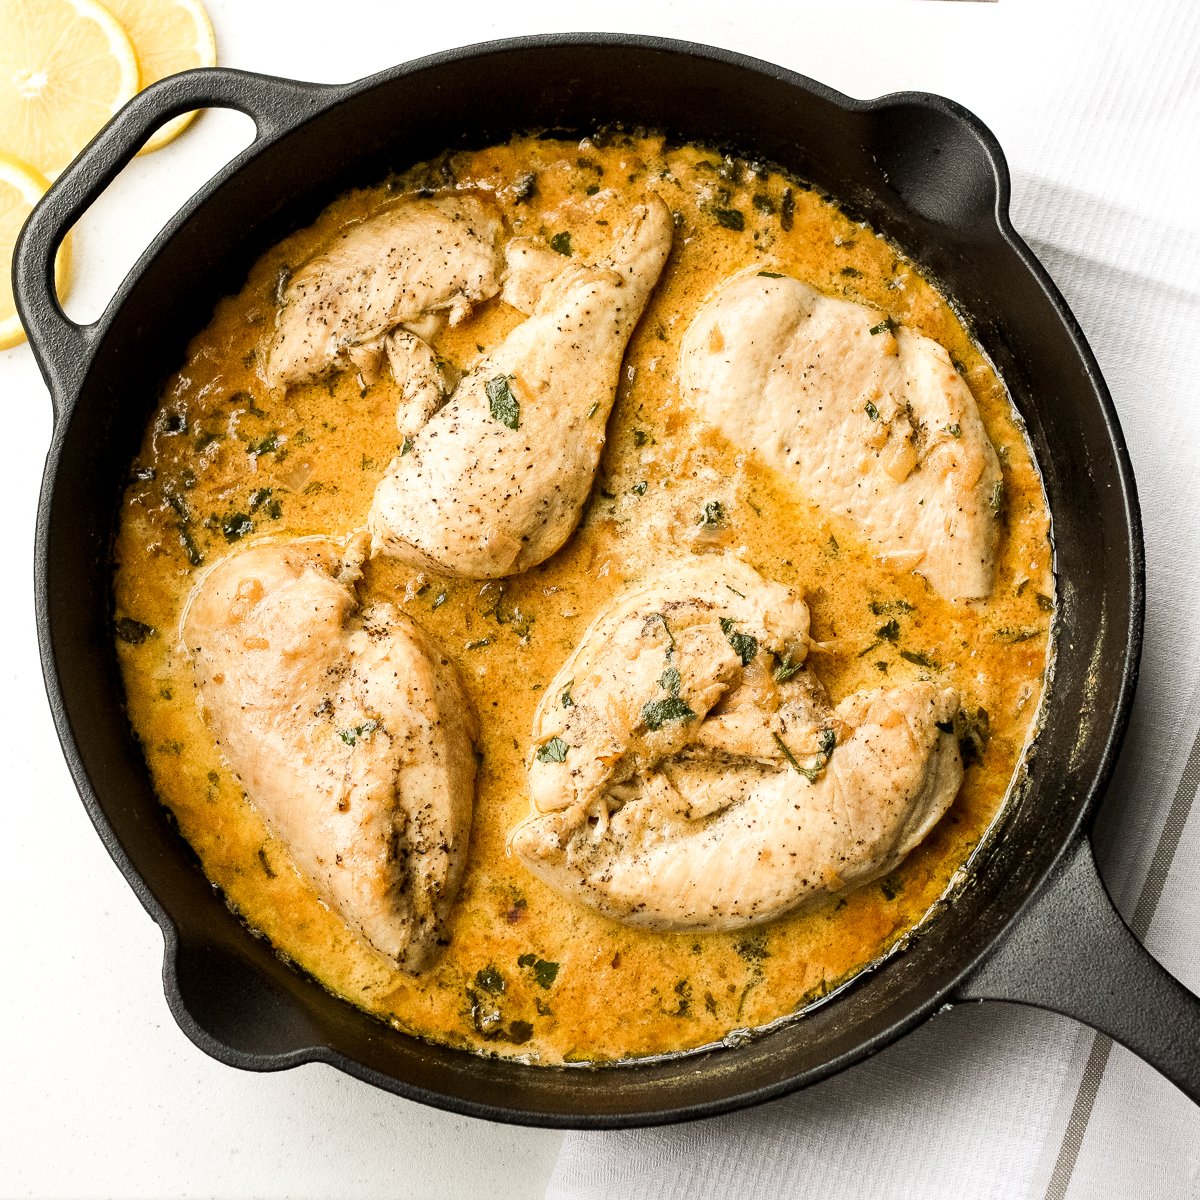 https://www.aheadofthyme.com/wp-content/uploads/2017/01/the-perfect-skillet-chicken-with-lemon-garlic-sauce-11.jpg